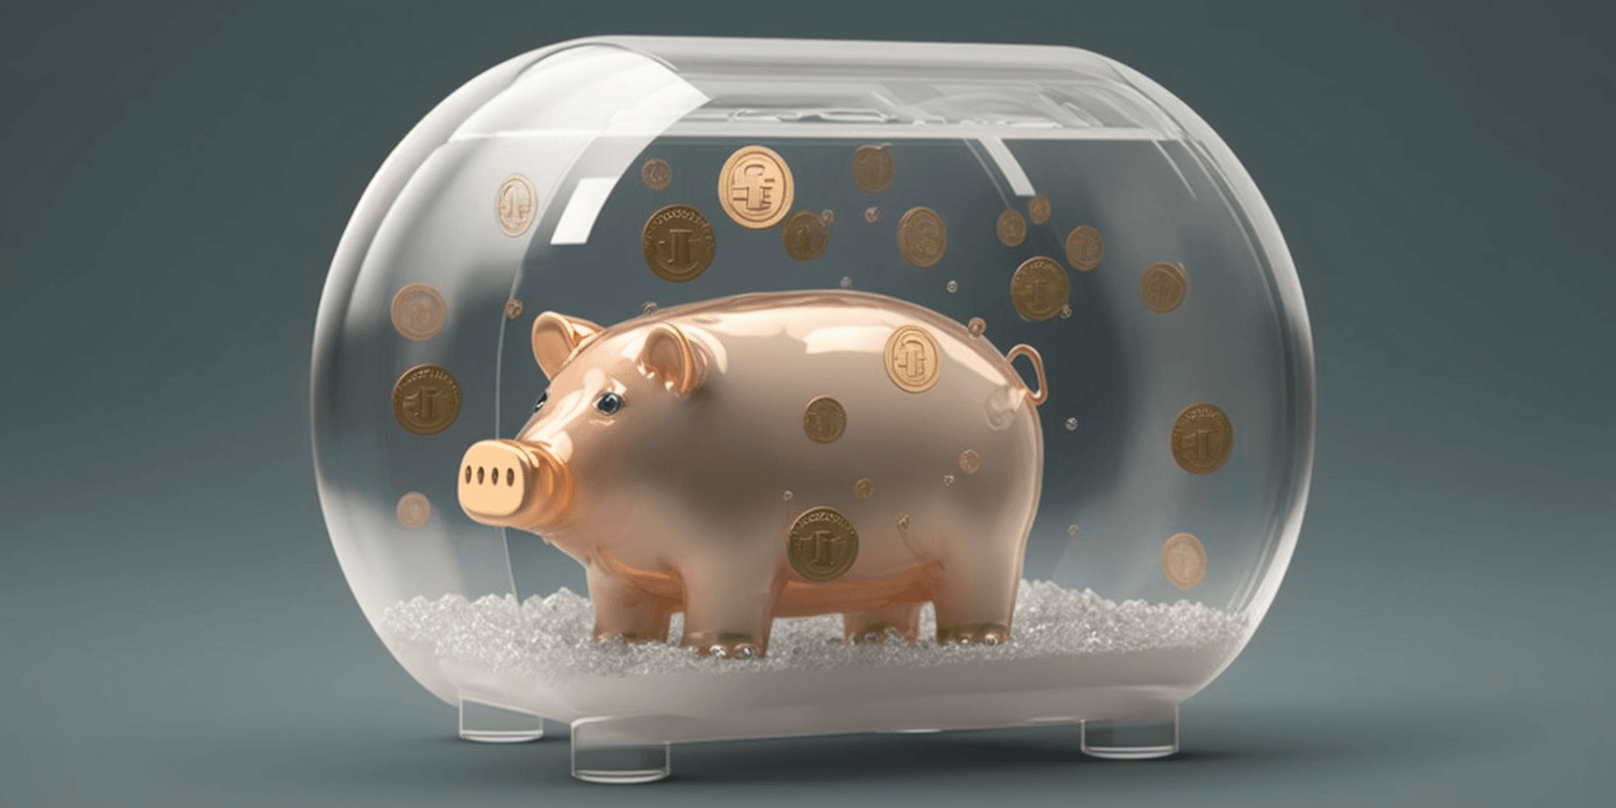 Transparent piggy bank with bitcoins inside, art generated by Midjourney